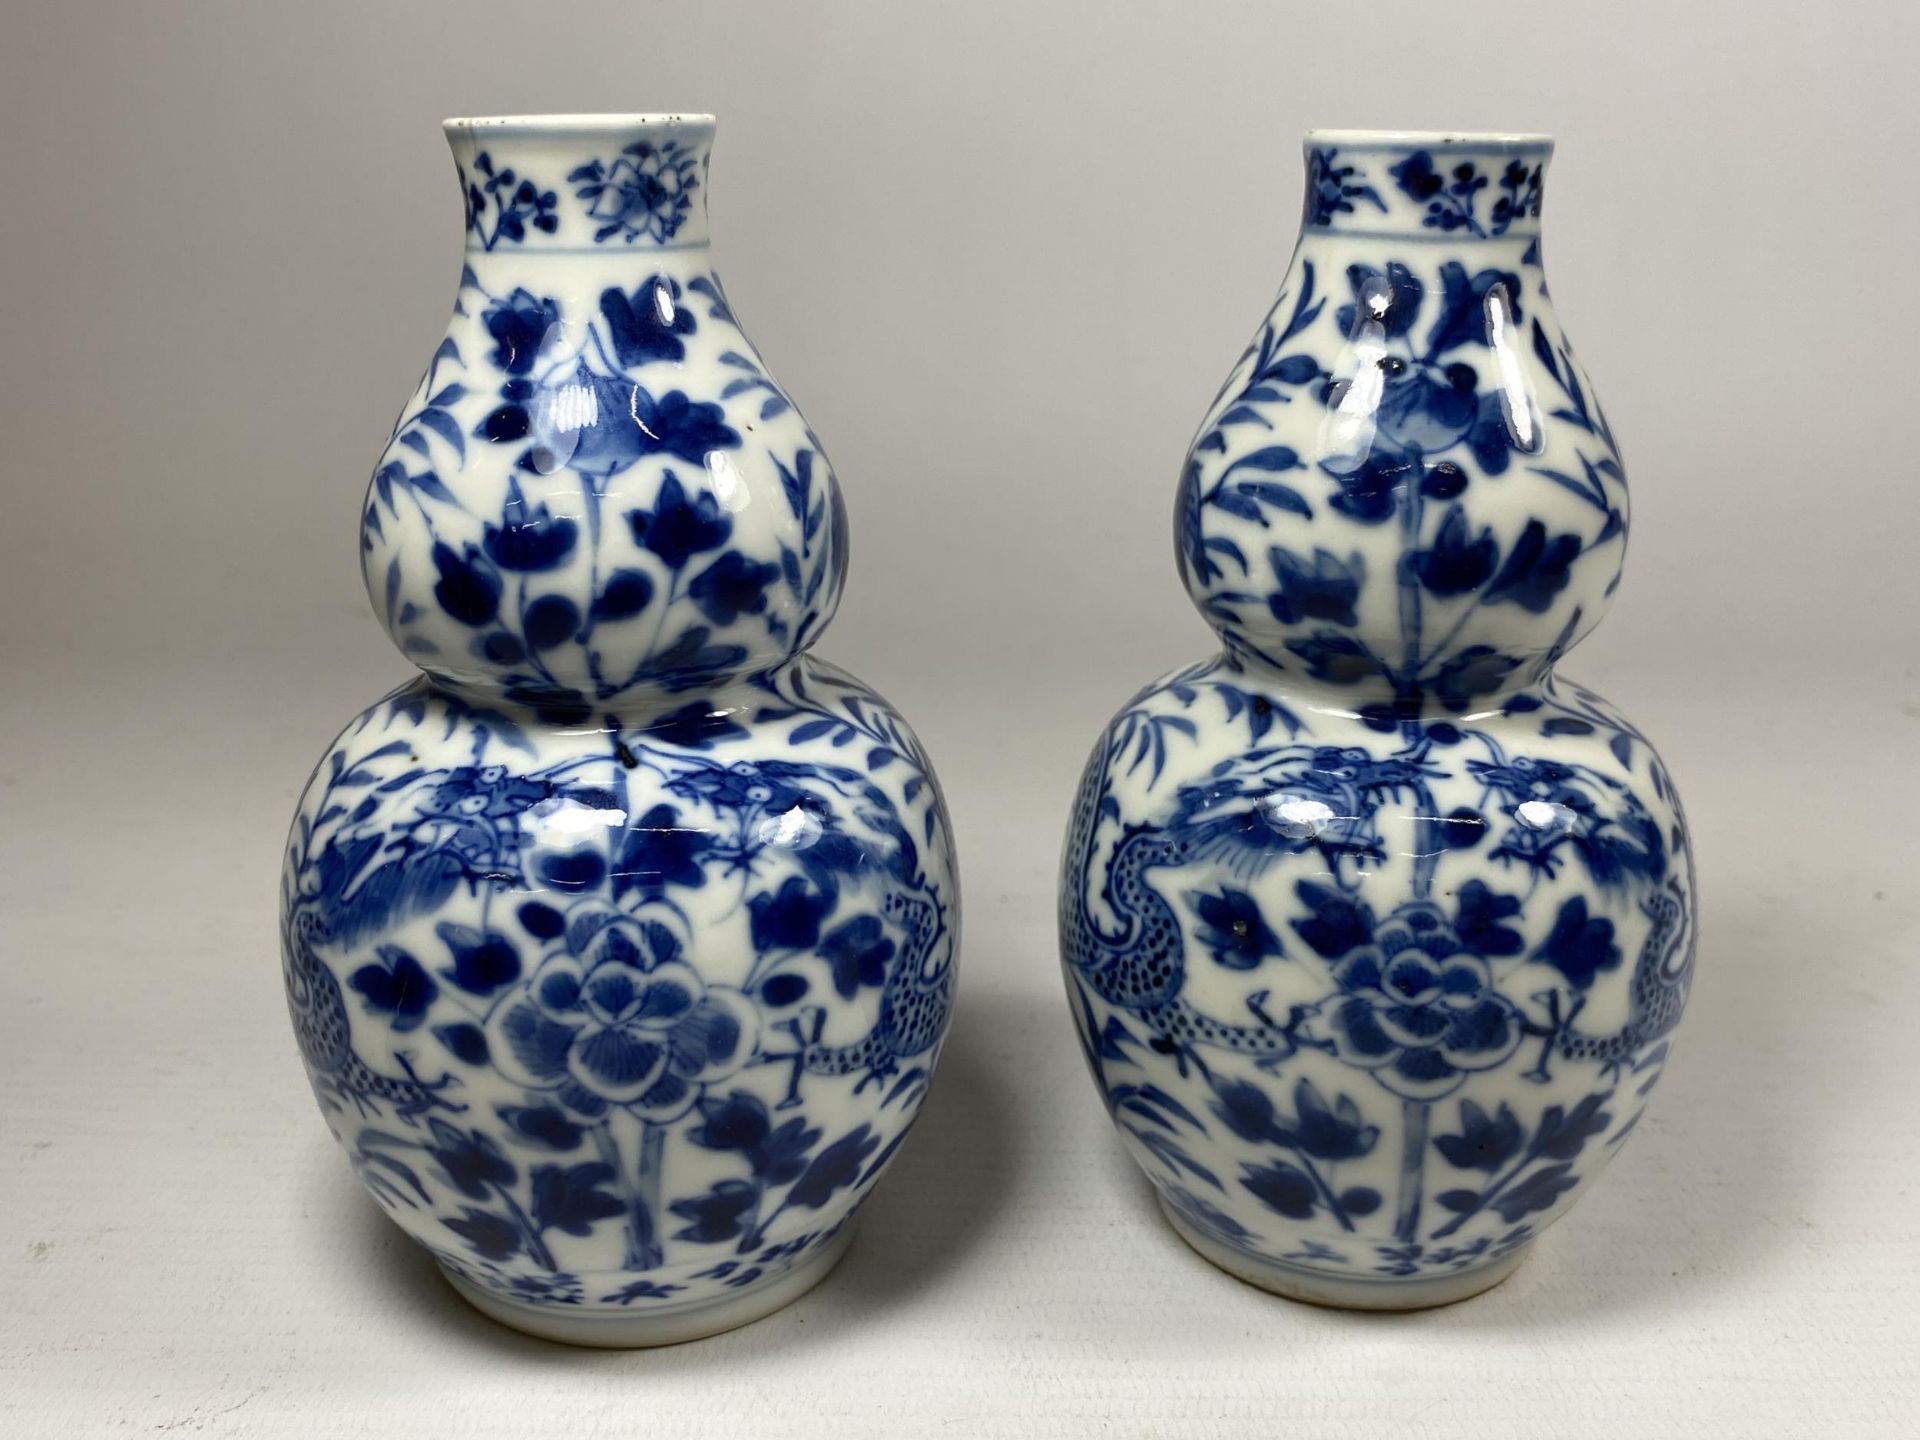 A PAIR OF QING 19TH CENTURY CHINESE BLUE AND WHITE KANGXI STYLE DOUBLE GOURD VASES, FOUR CHARACTER